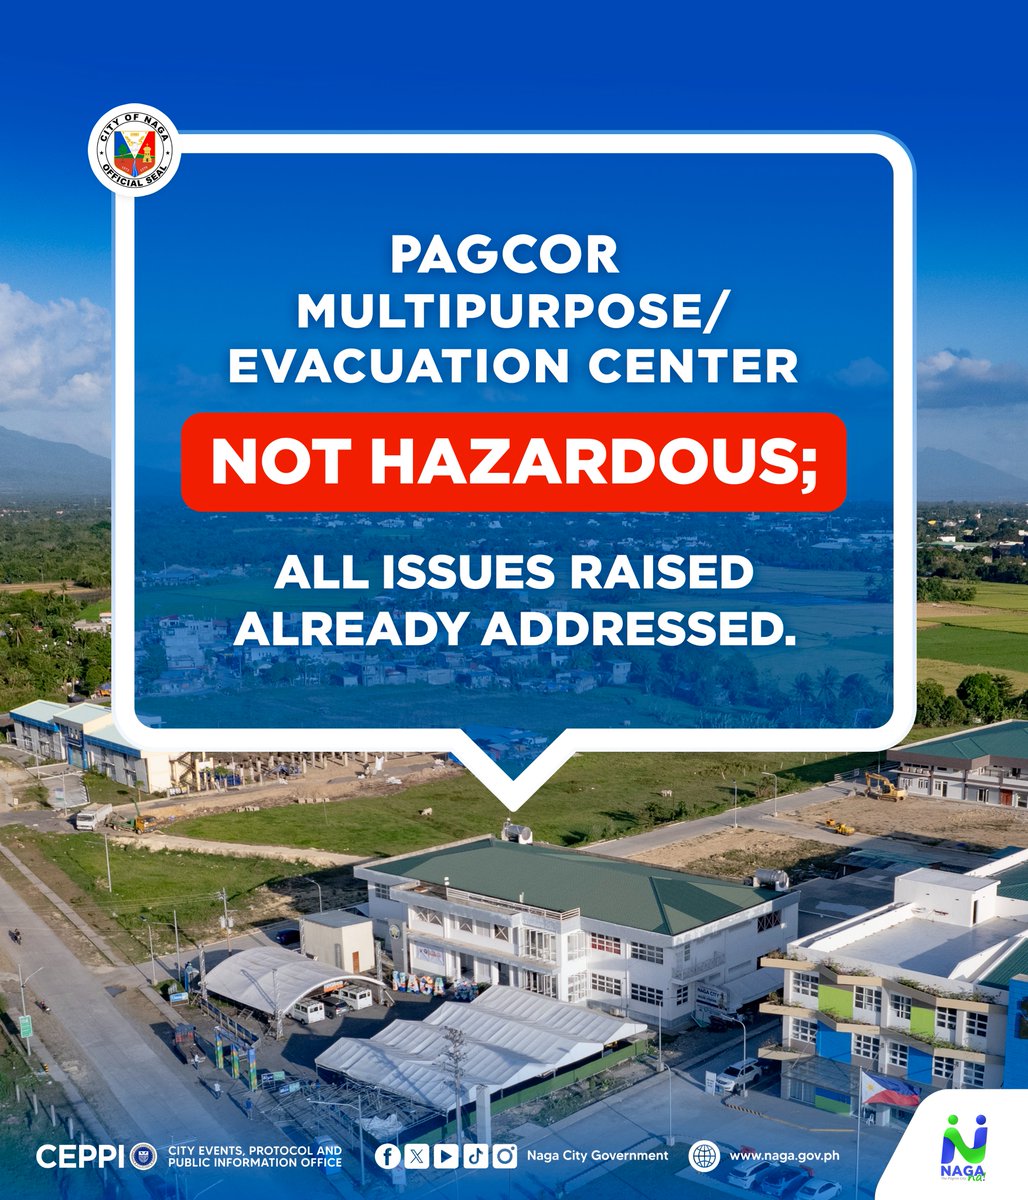 Recent reports have been circulating regarding the construction of the PAGCOR Multipurpose Evacuation Center located within the Balatas Development Complex being regarded as “hazardous”.